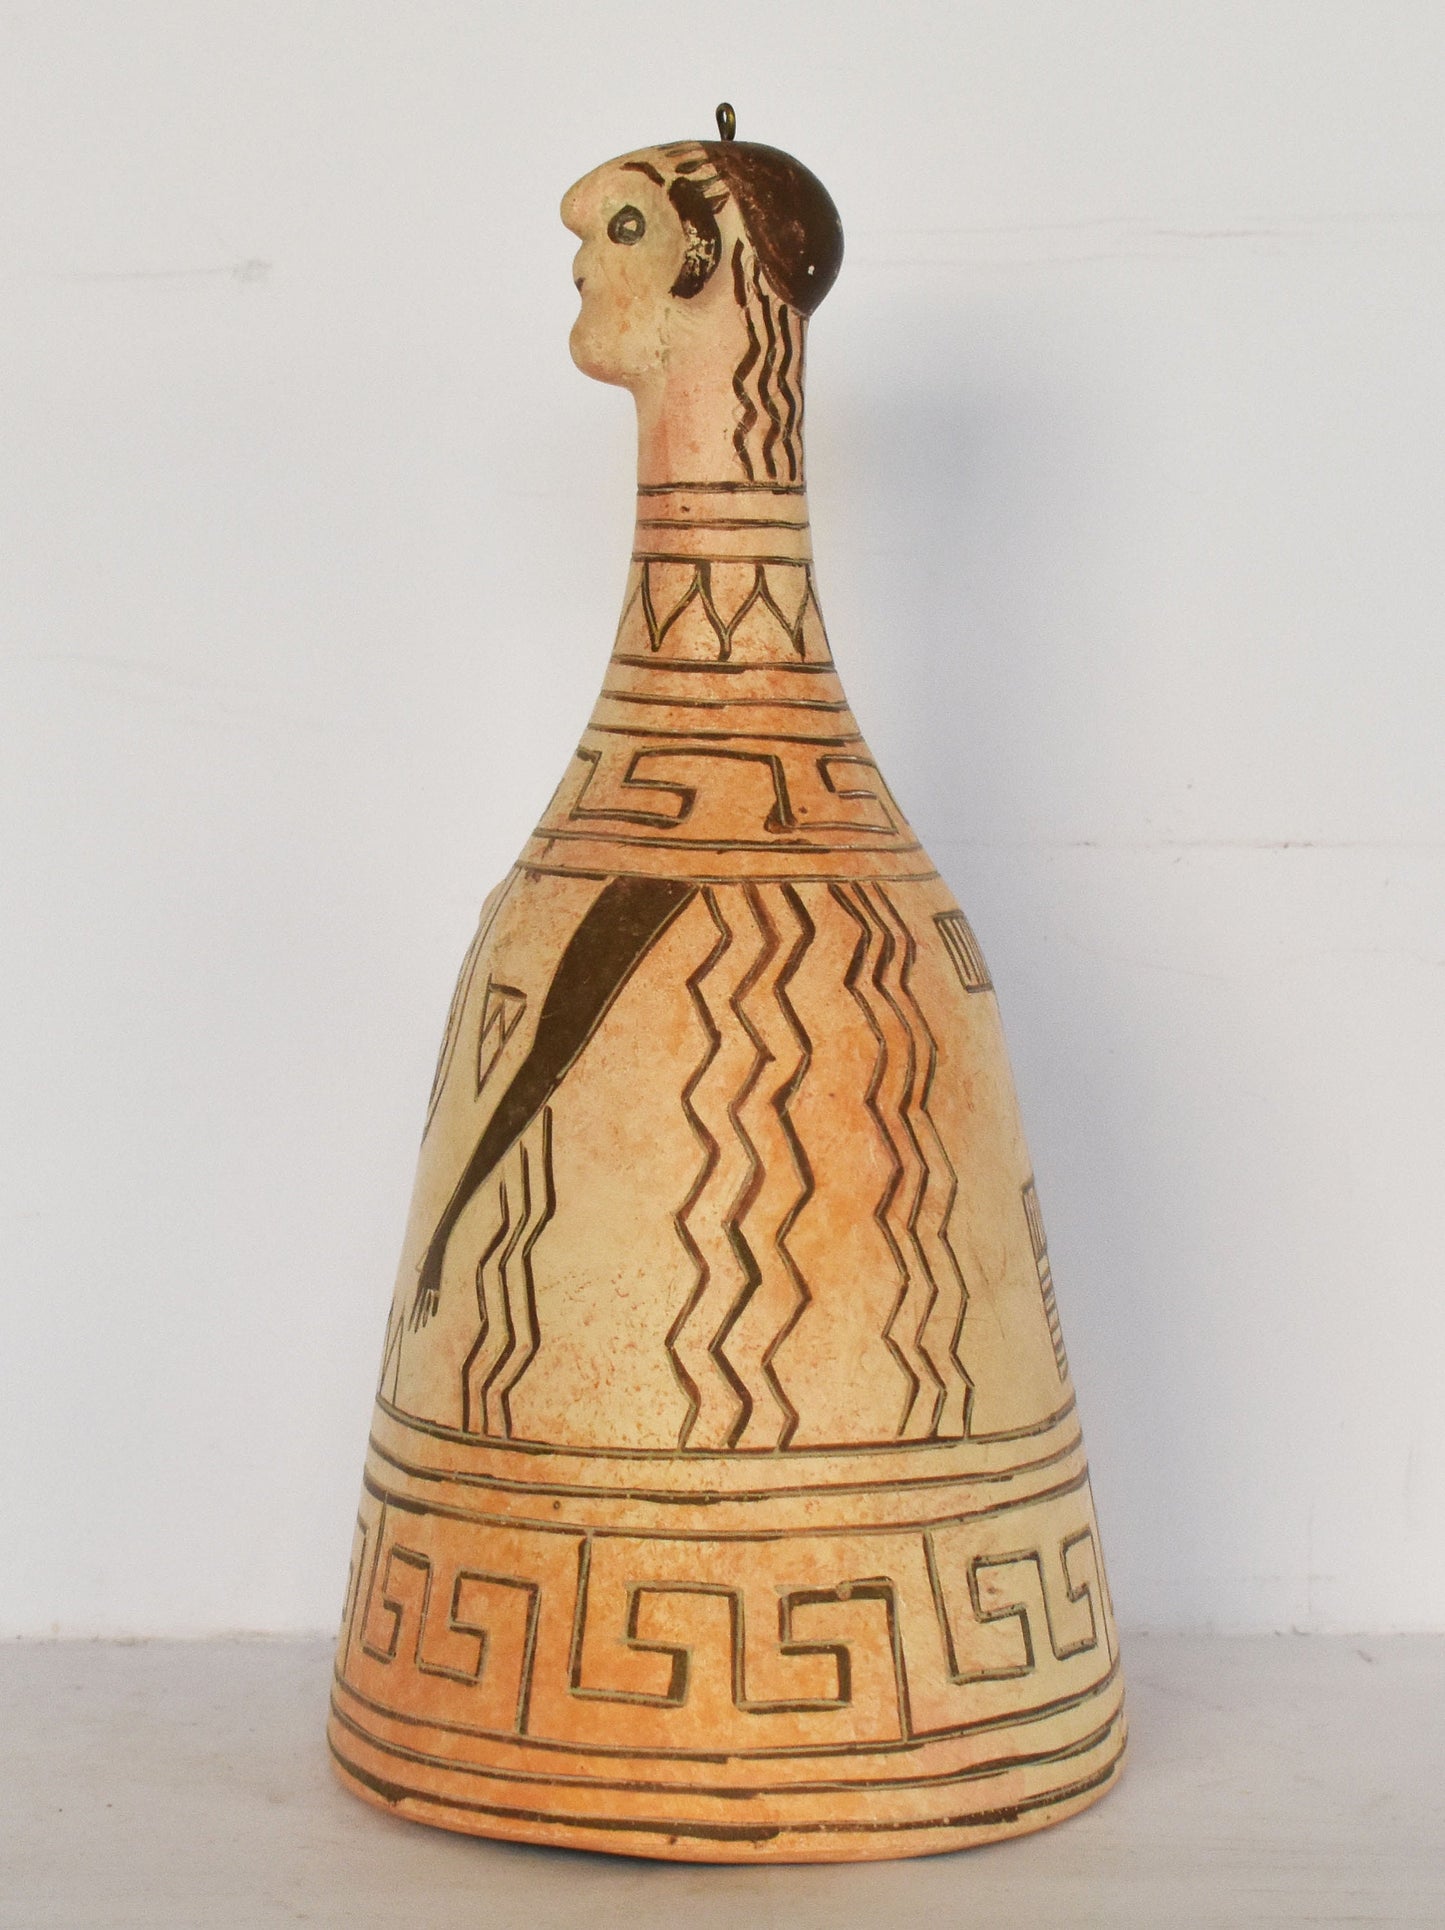 Bell-shaped Female Figurine - 600 BC - Boeotian - Archaeological Museum of Thiva - Reproduction - Ceramic Artifact